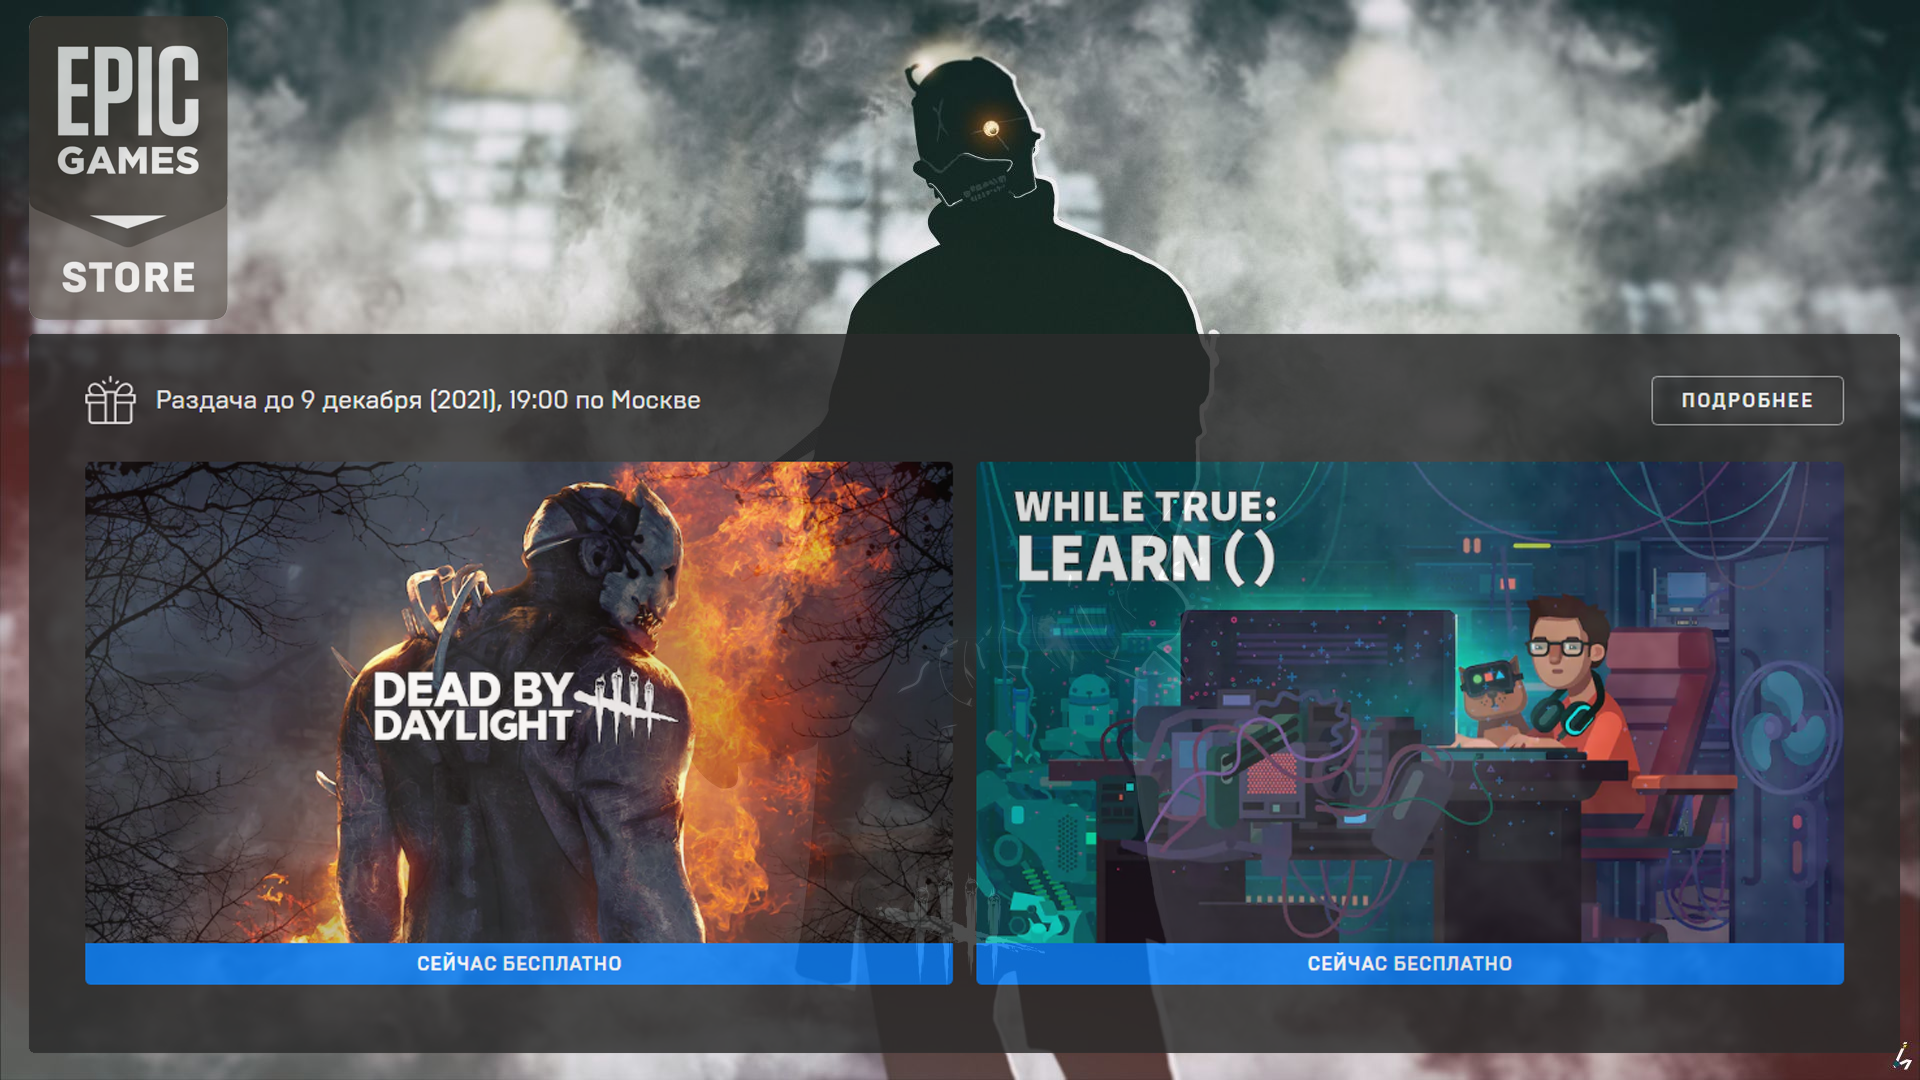 [Epic Games Store] Dead by Daylight and while True: learn() - Computer games, Freebie, Not Steam, Dead by daylight, Epic Games Store, Epic Games